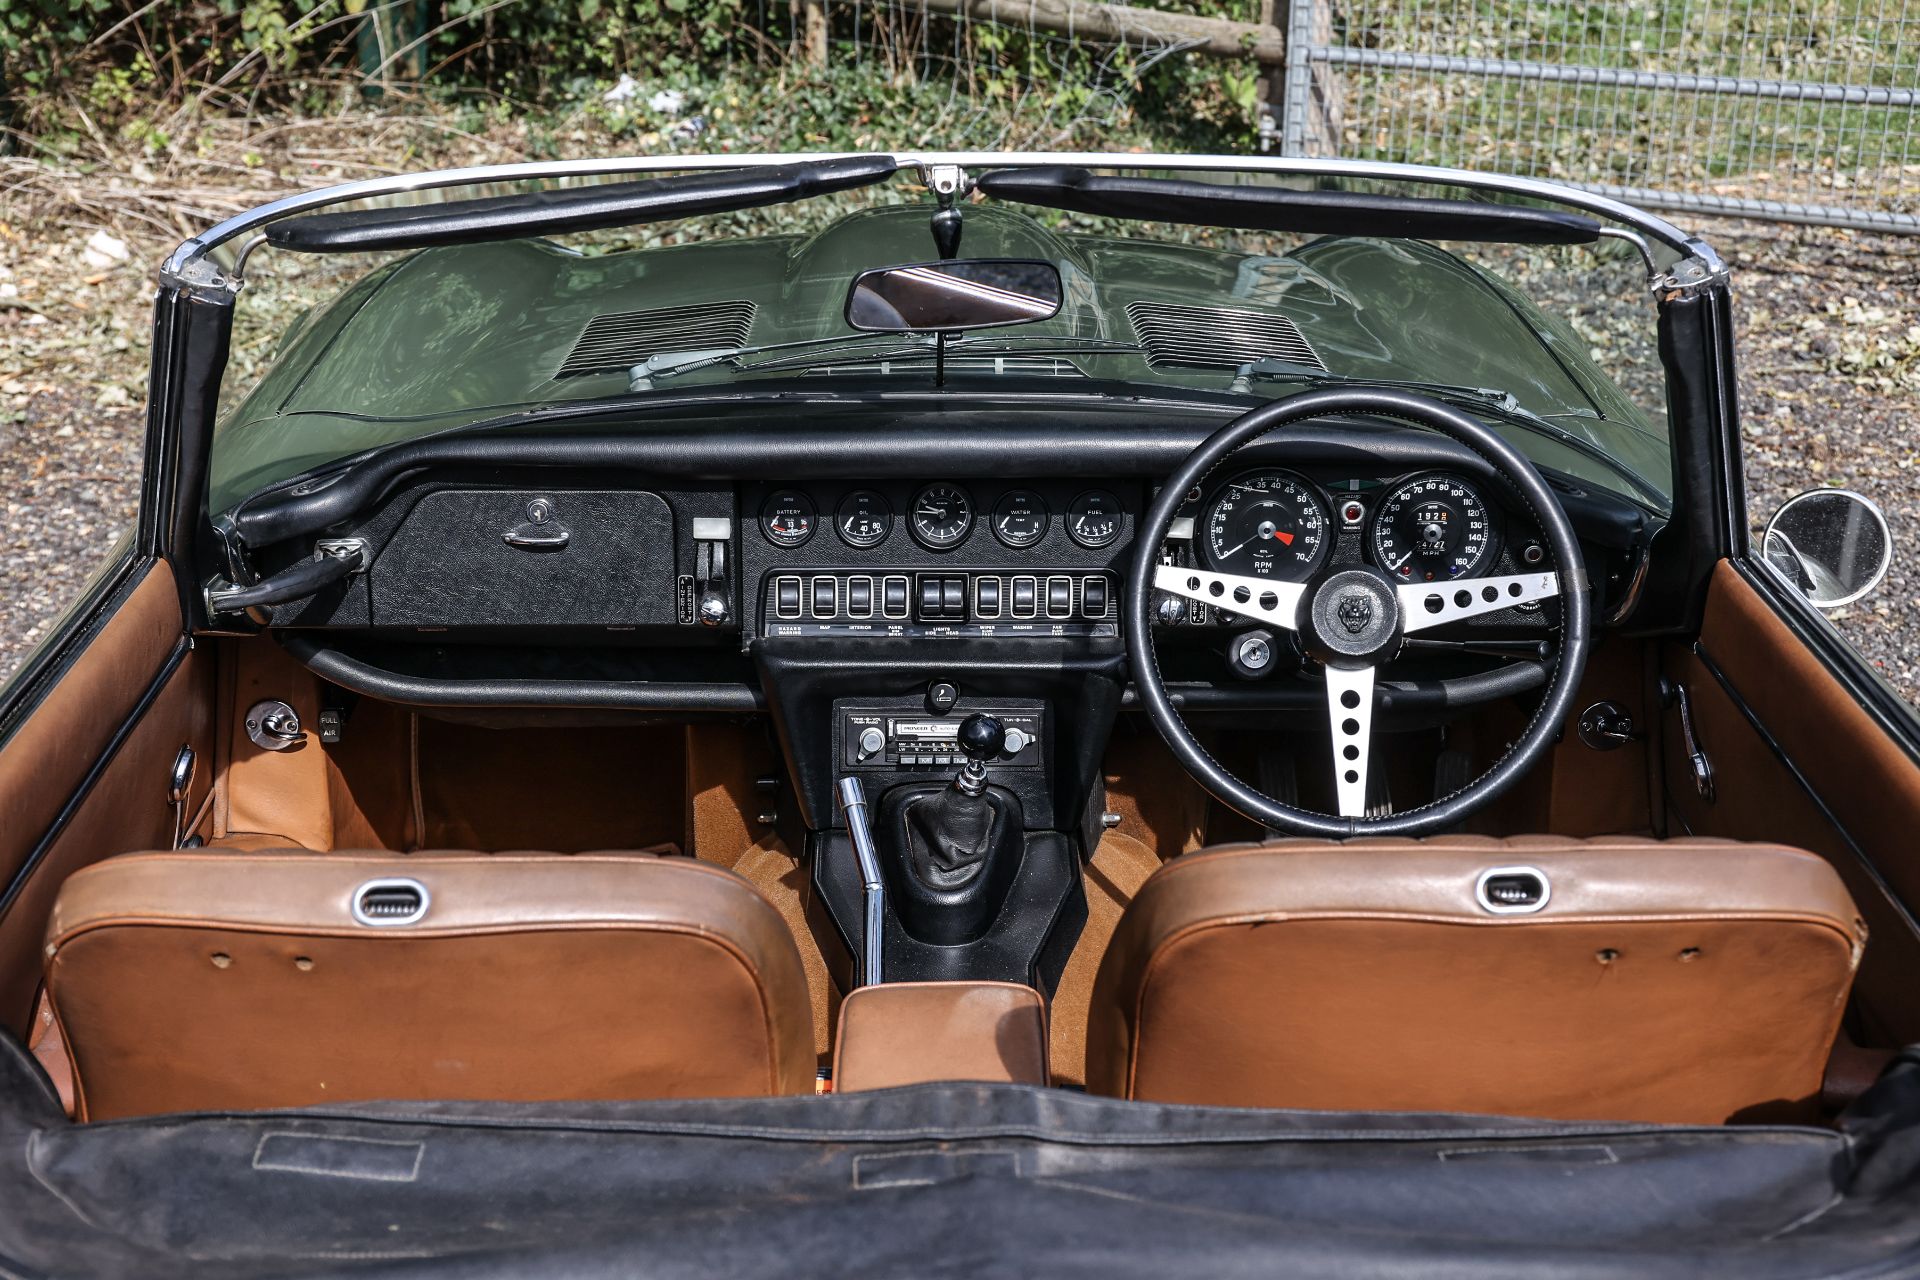 1973 JAGUAR E-TYPE SERIES III ROADSTER Registration Number: CMS 781 Chassis Number: 1S1868 - Image 15 of 22